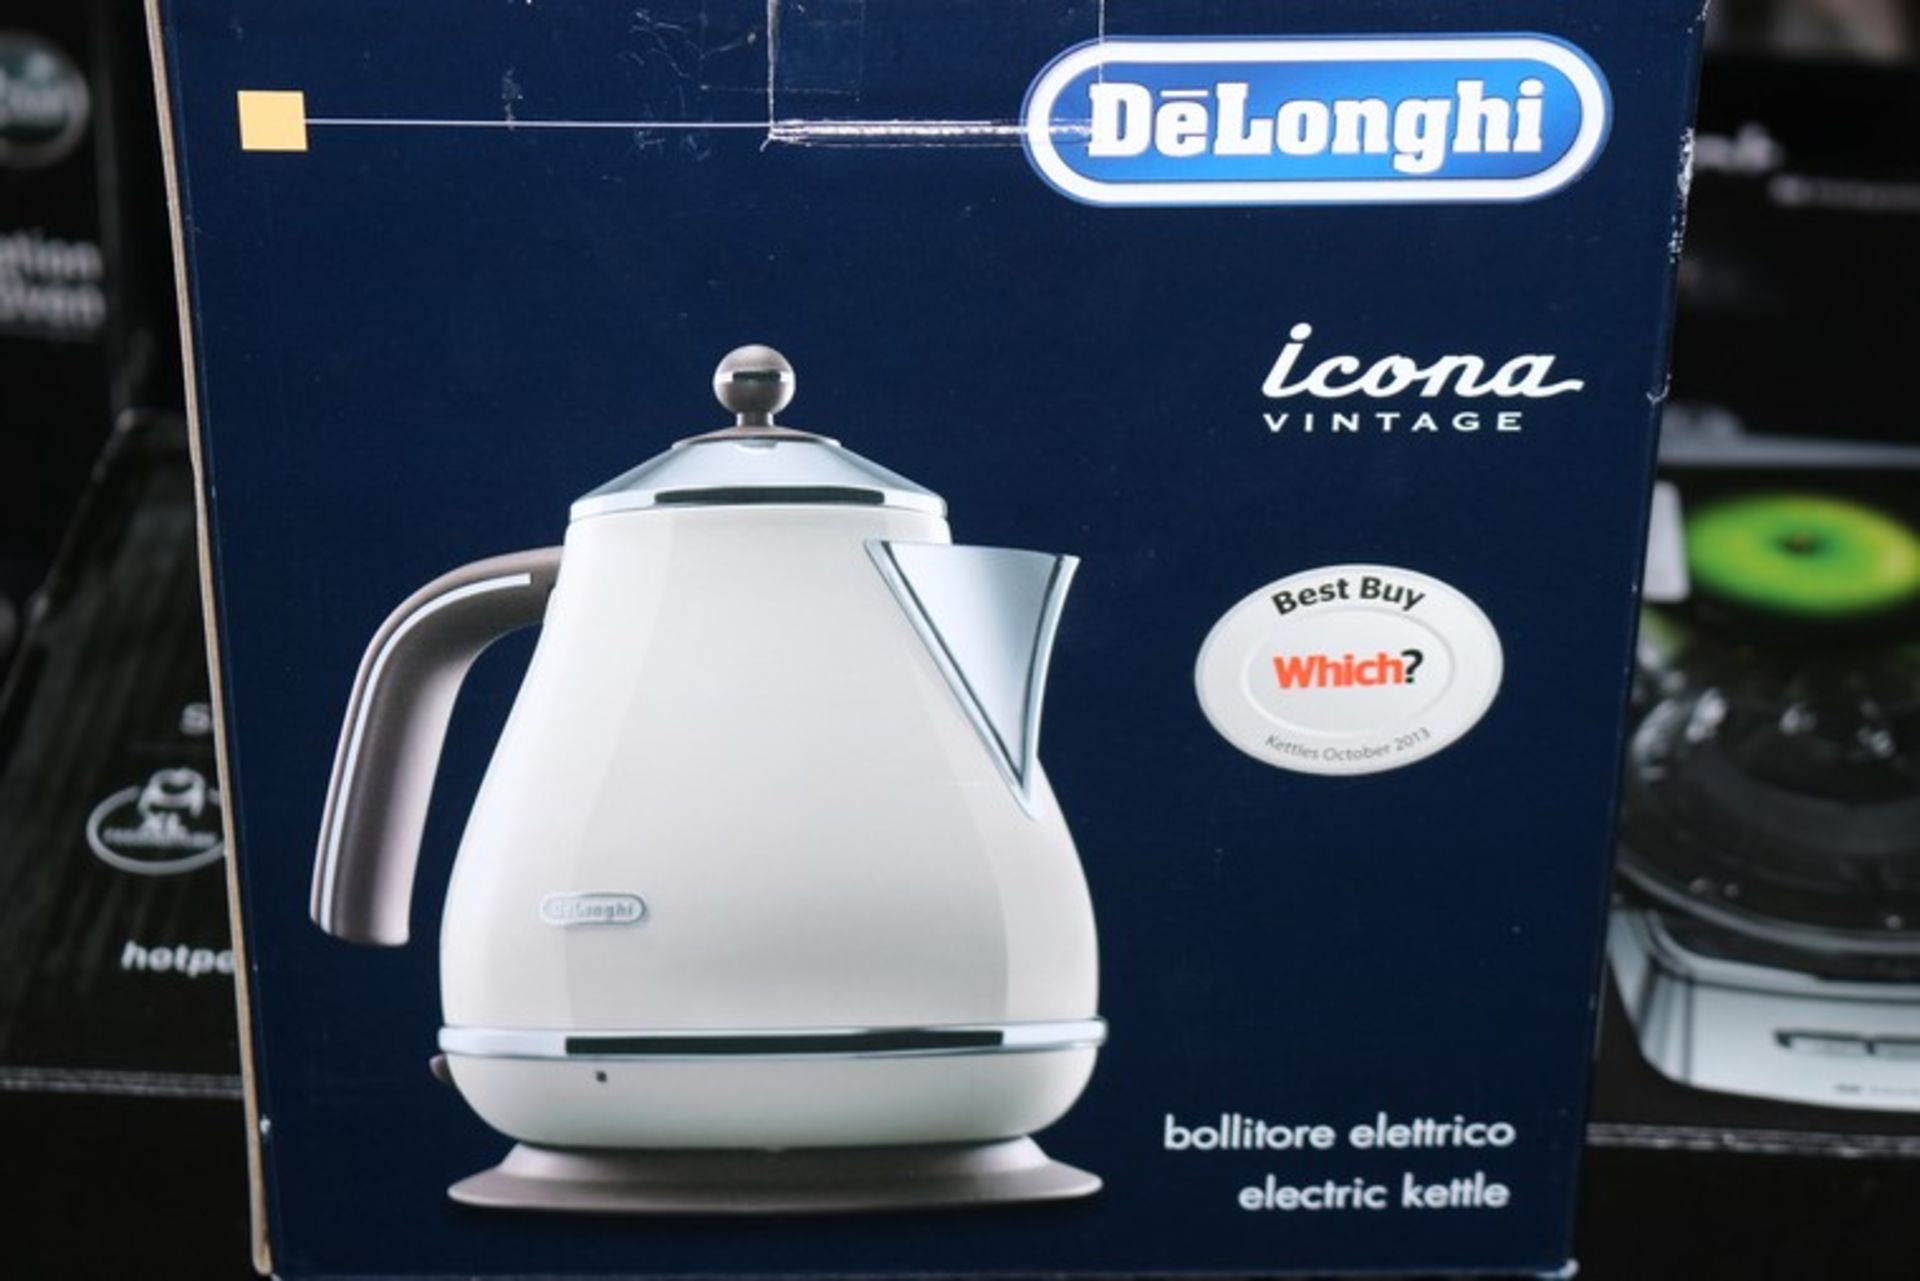 1 x BOXED DELONGHI ICONA VINTAGE 1.5L CORDLESS JUG KETTLE RRP £50 (17.2.17) *PLEASE NOTE THAT THE